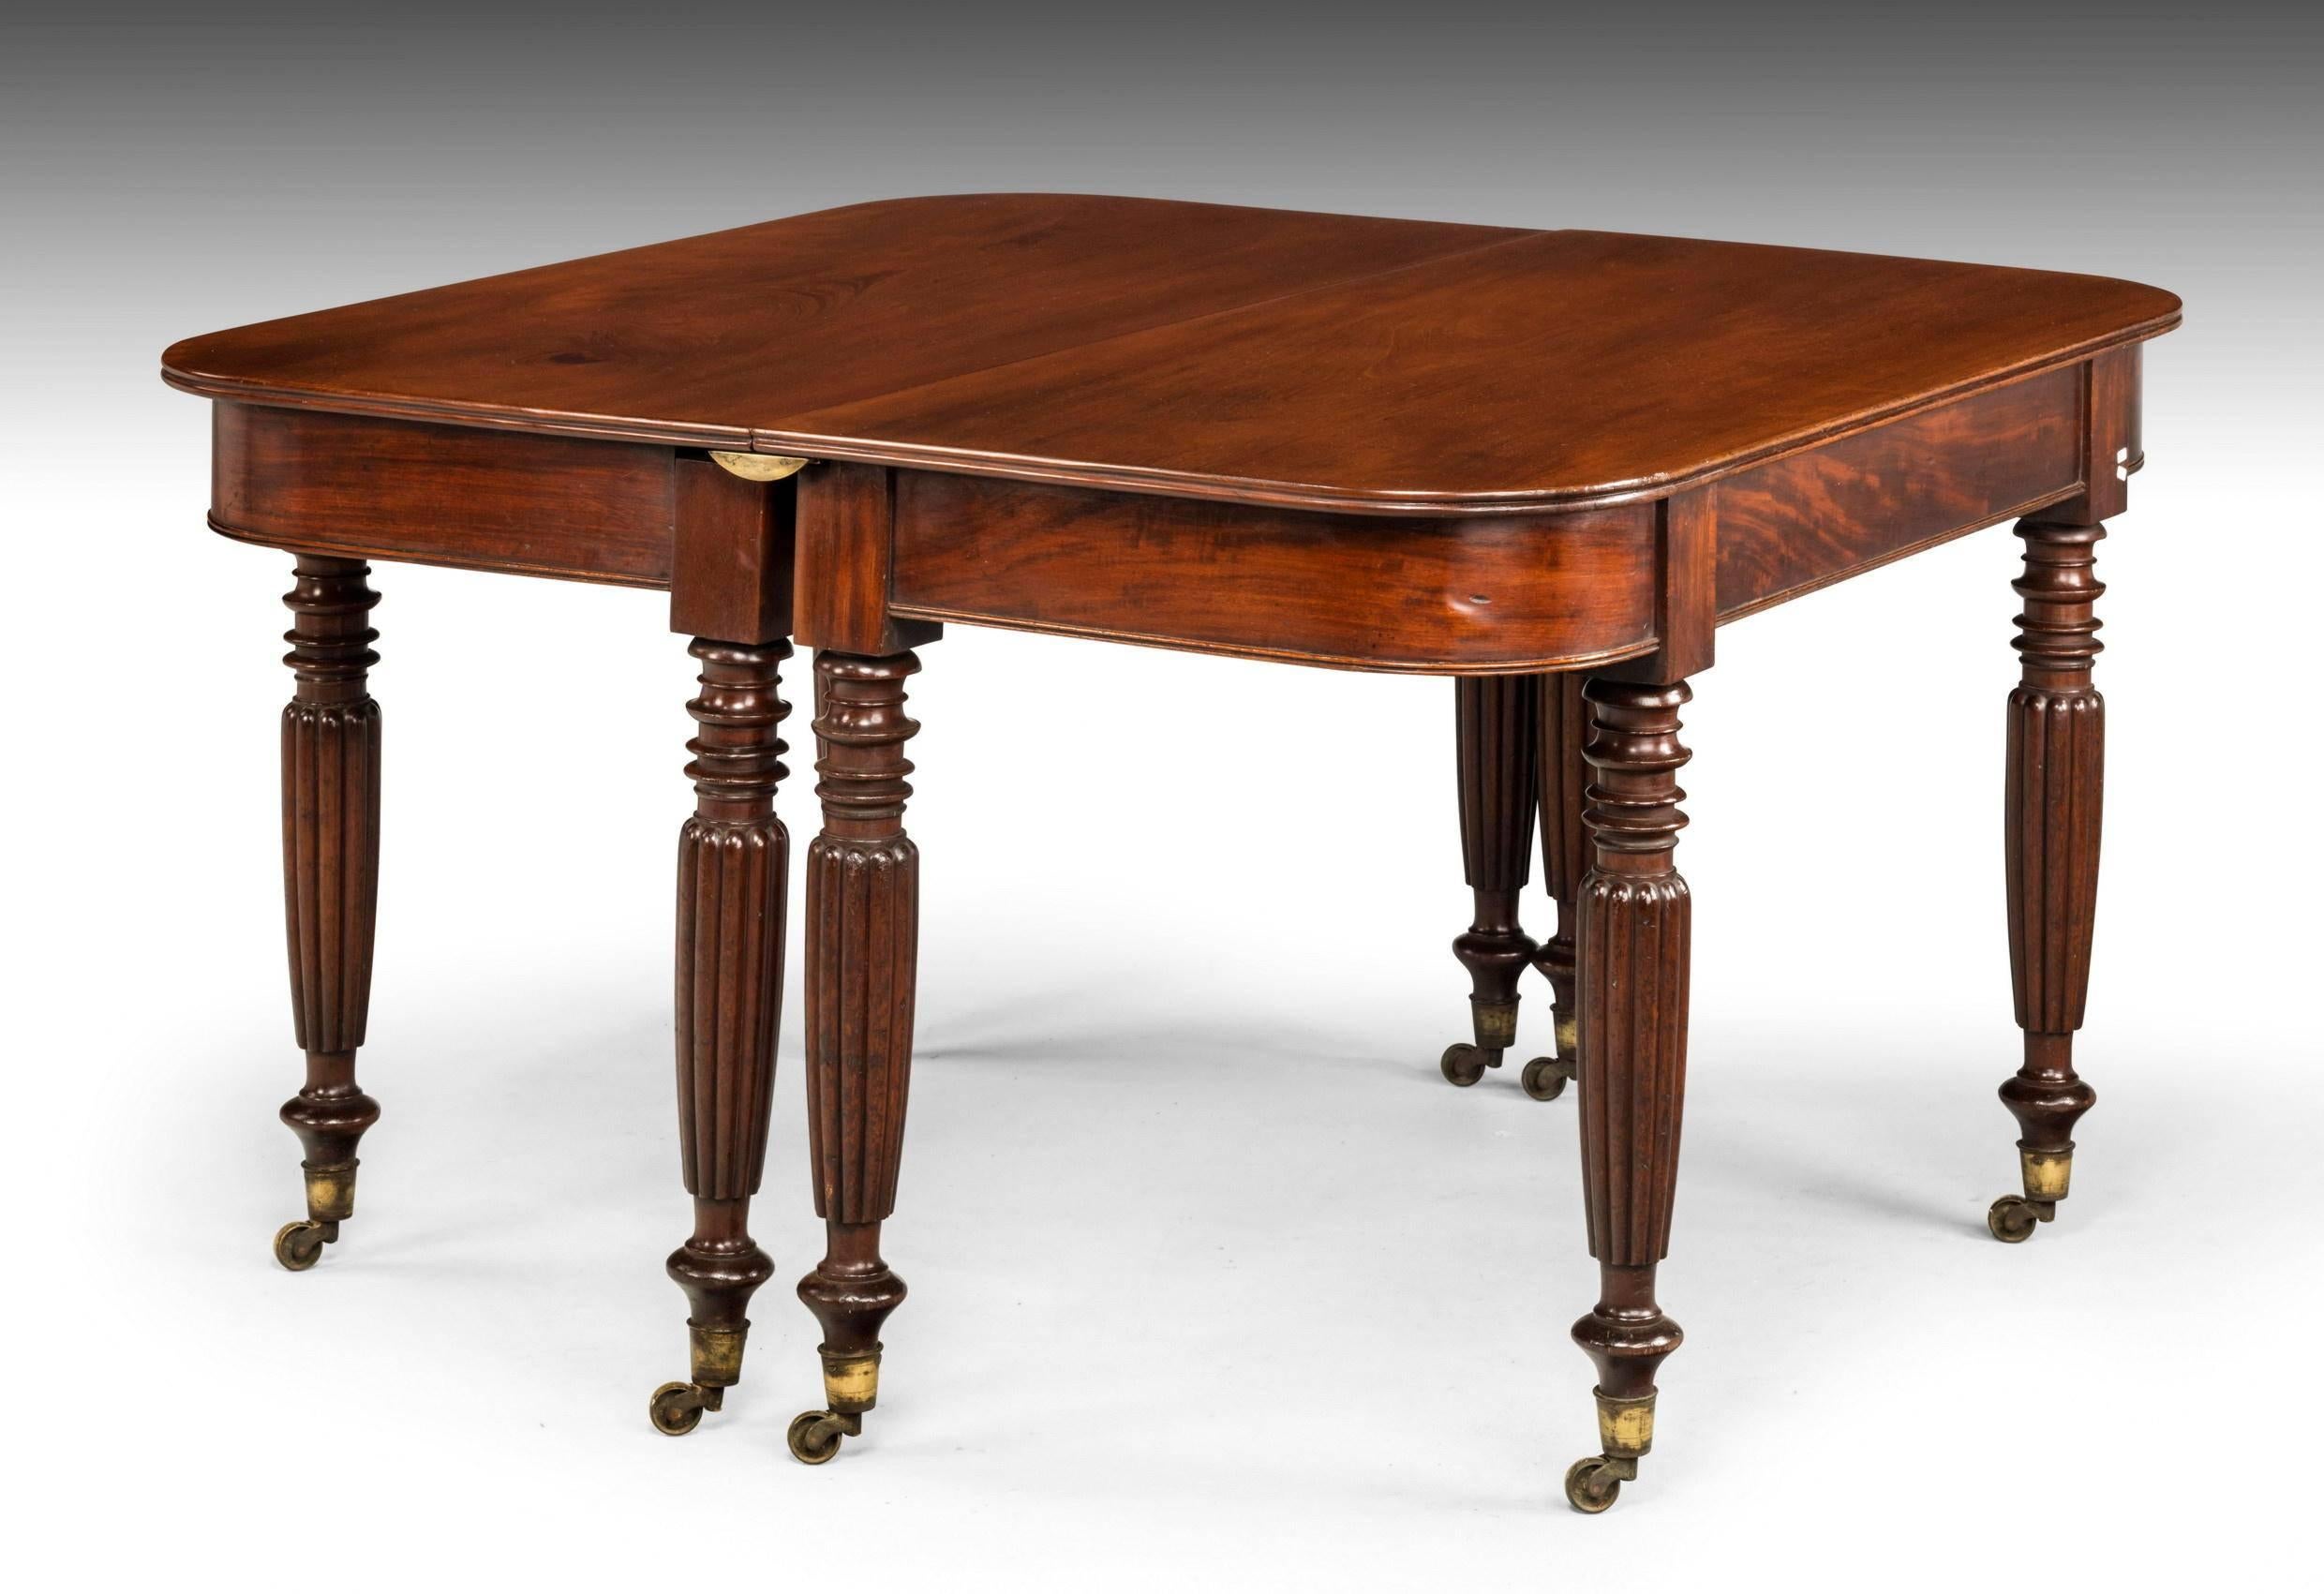 Late Regency Mahogany Two-Section Dining Table In Excellent Condition In Peterborough, Northamptonshire